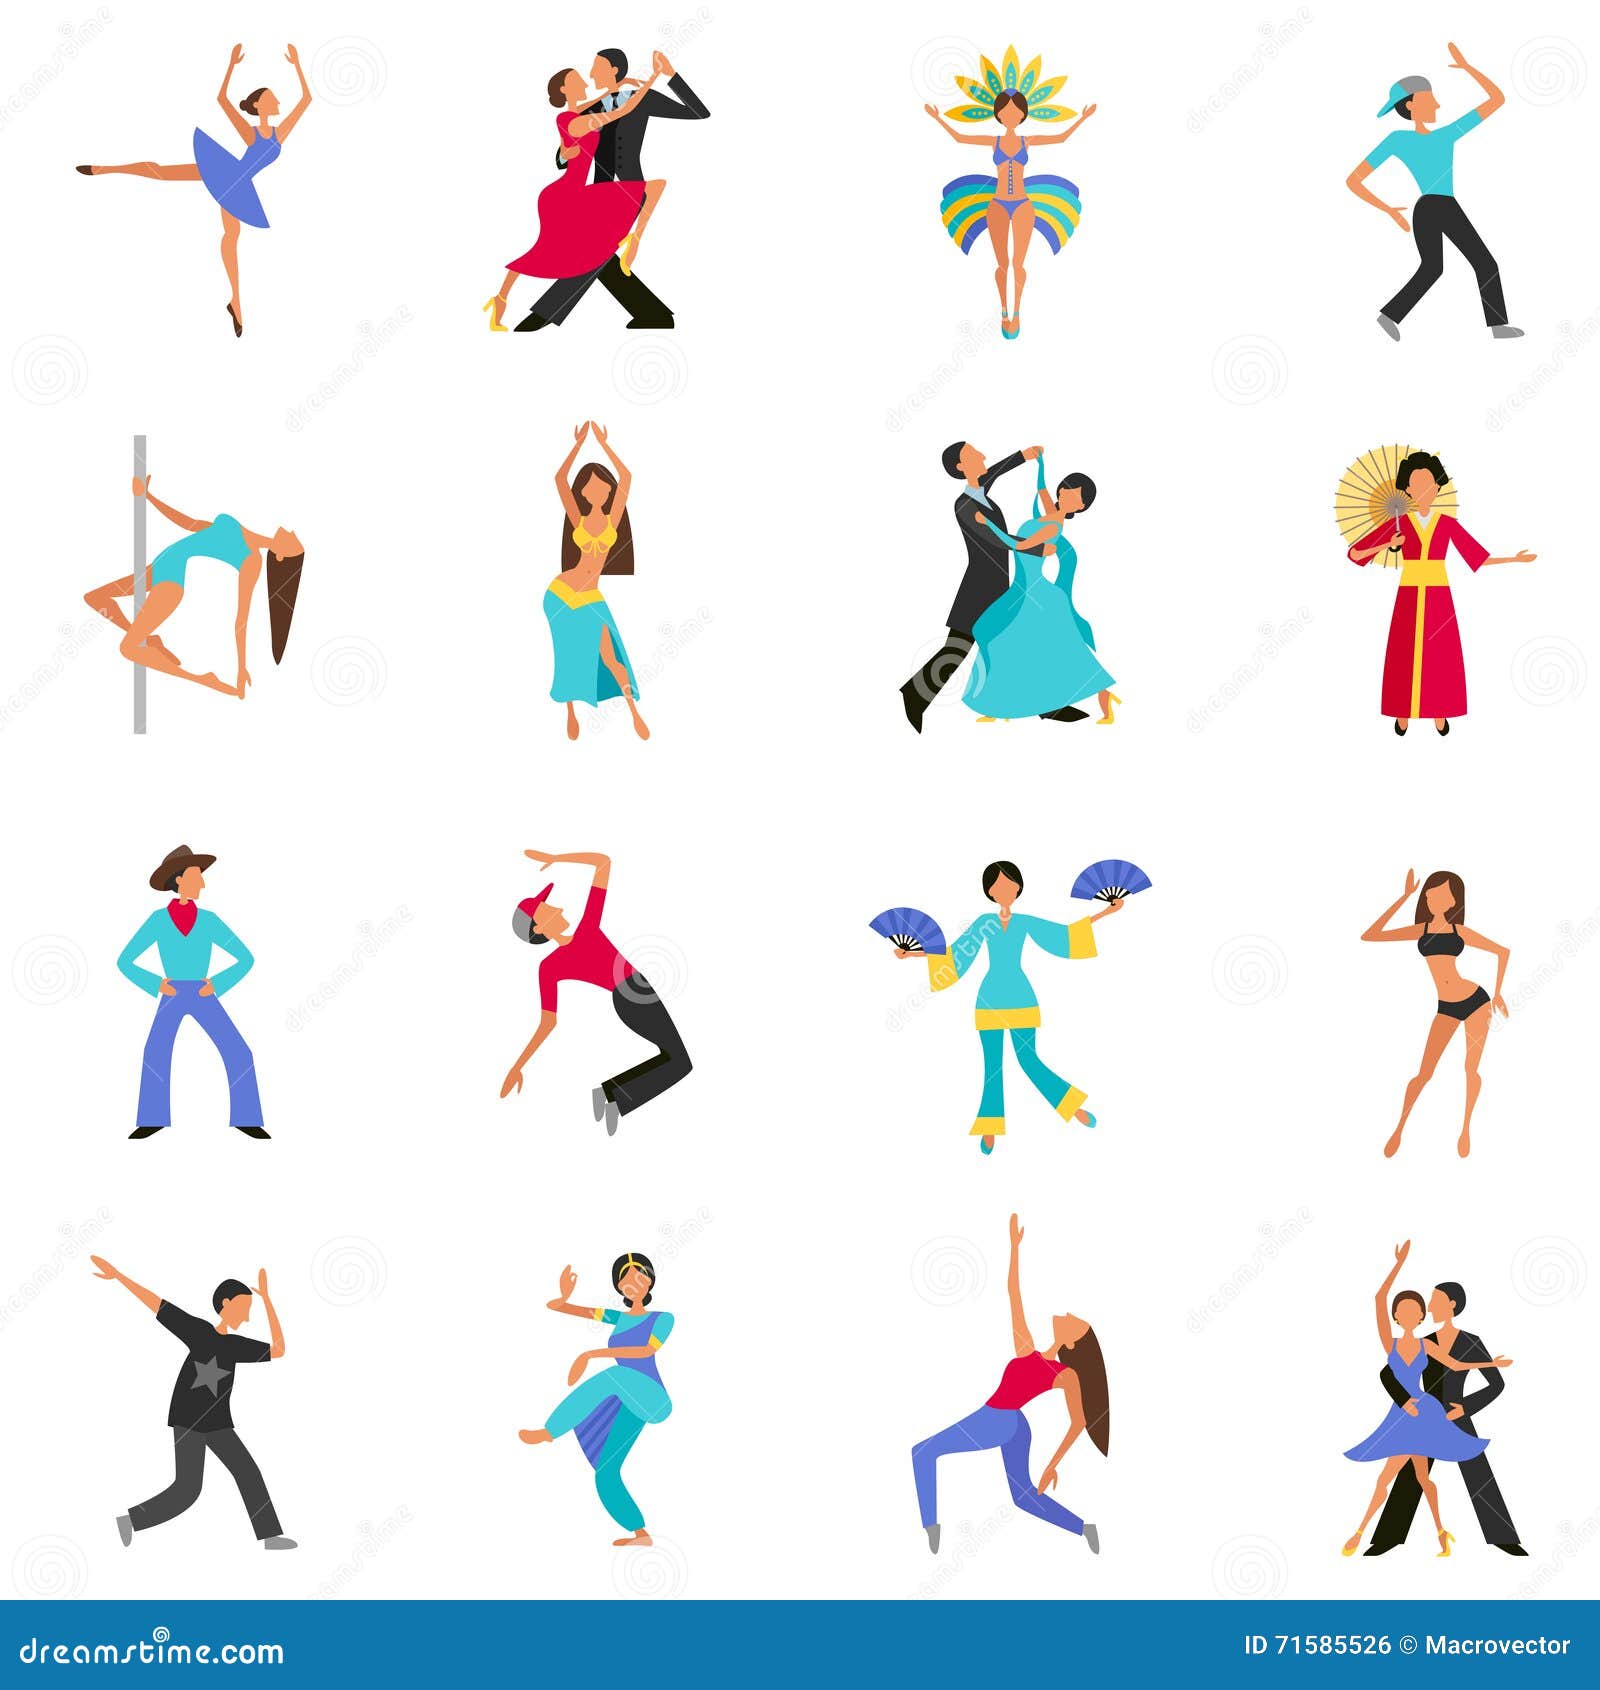 Dance Icon Flat Stock Vector Illustration Of Icons Flamenco 71585526 Choose from over a million free vectors, clipart graphics, vector art images, design templates, and illustrations created by artists worldwide! dreamstime com